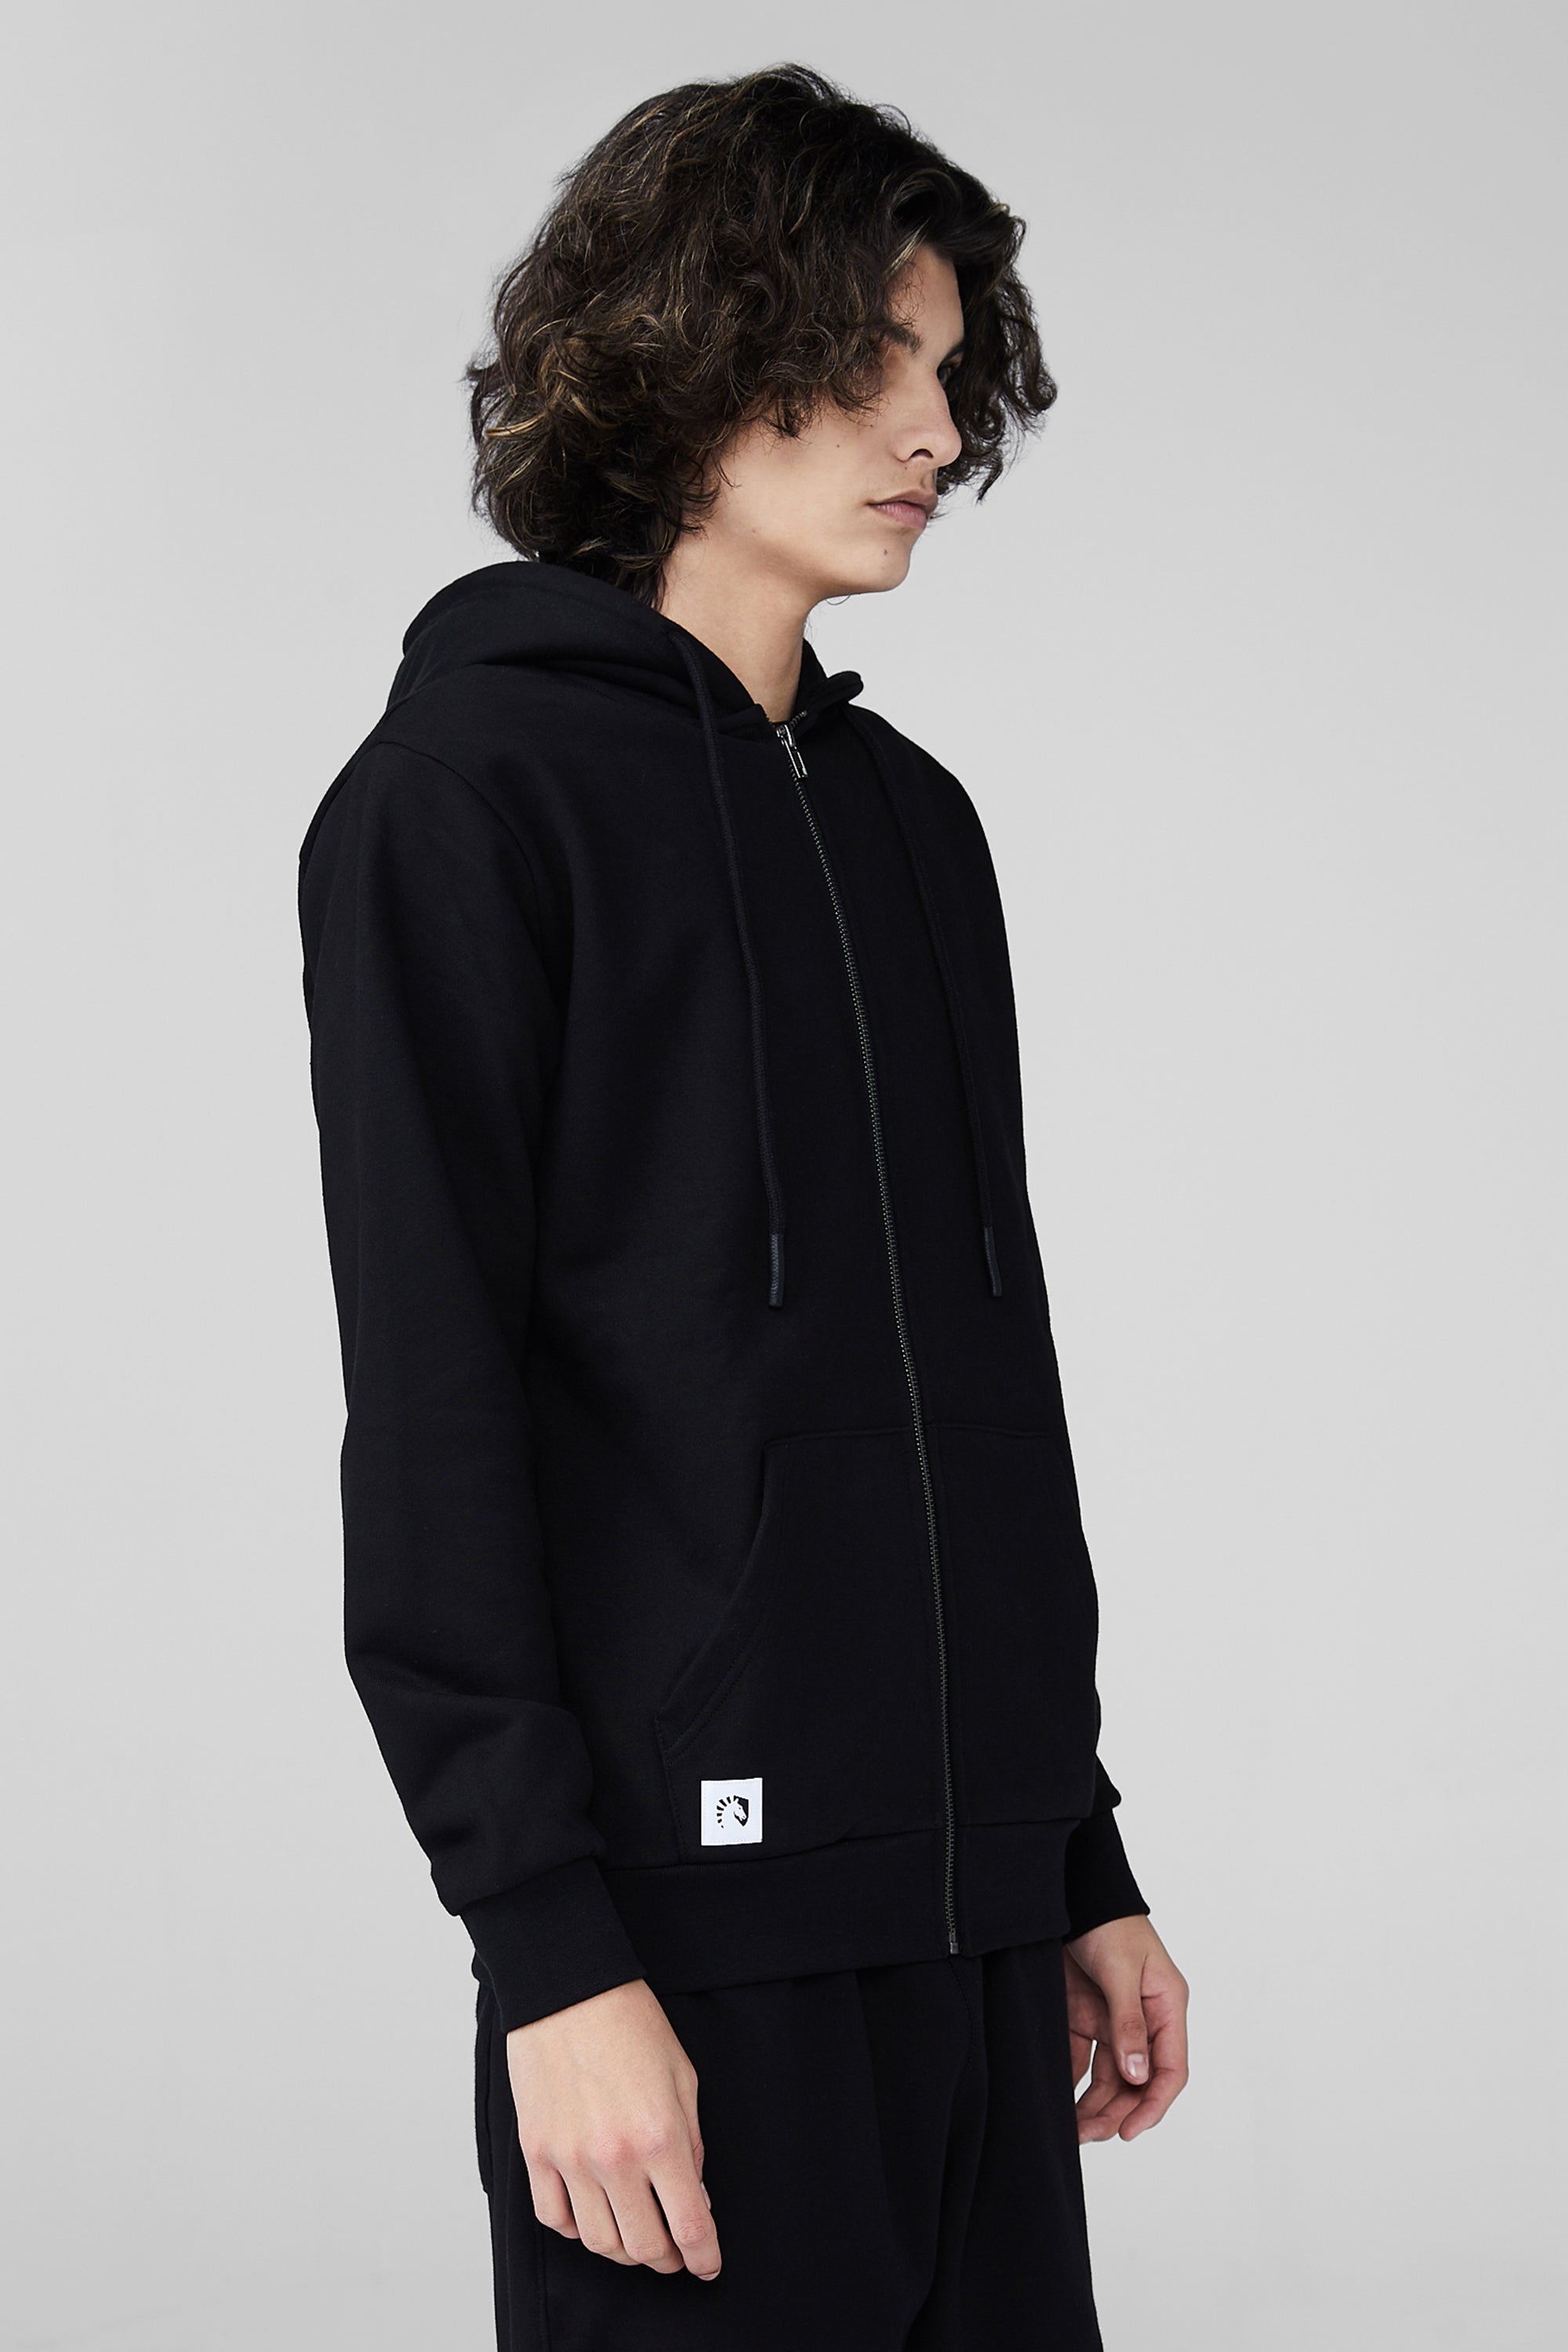 EMBROIDERED LOGO ZIP HOODIE